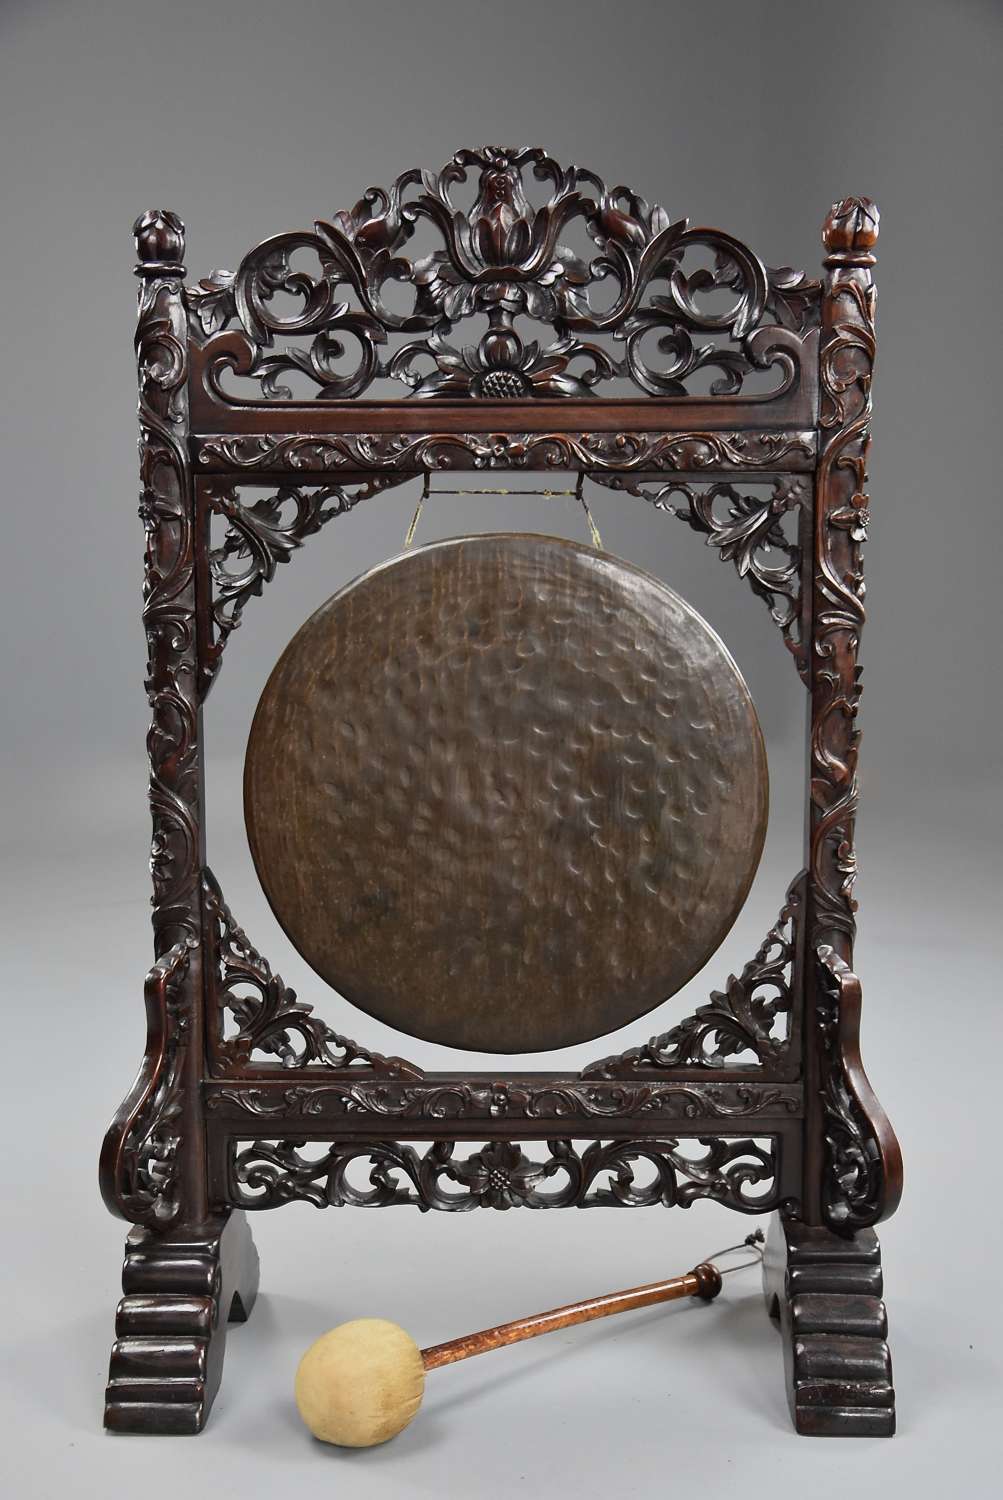 Fine quality late 19thc Chinese rosewood dinner gong with striker